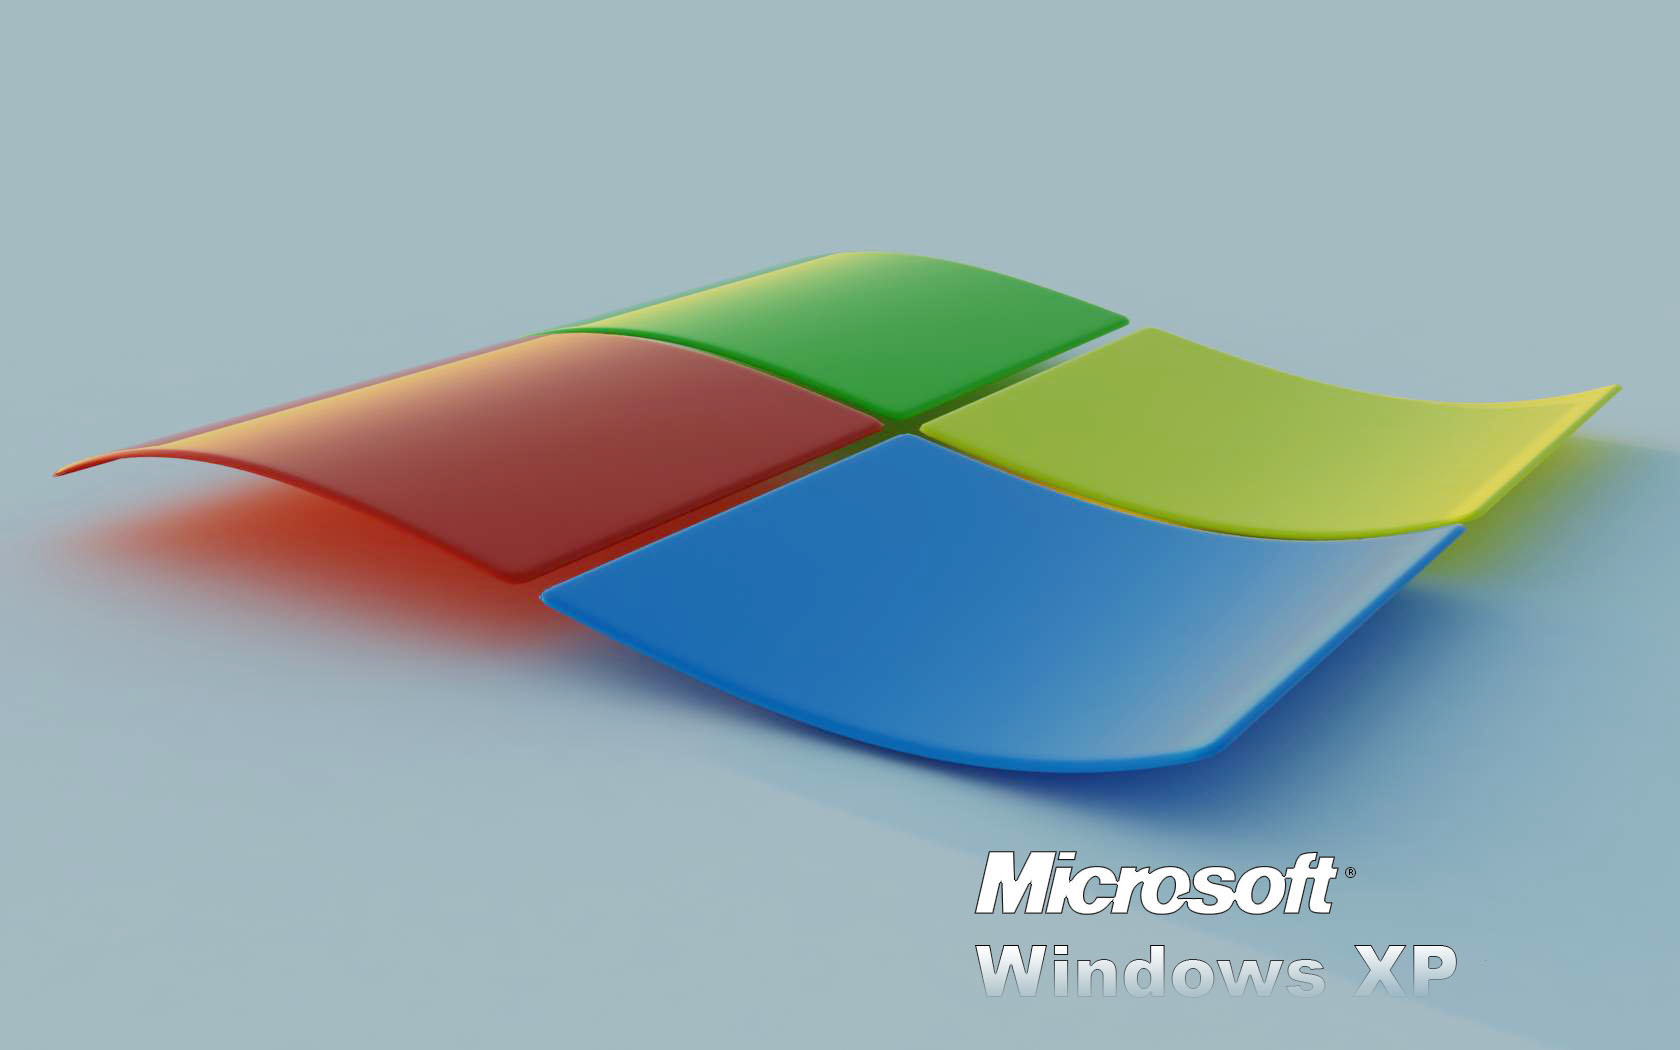 Windows wallpaper, Wallpaper XP - Made with 3ds max Vray Photoshop